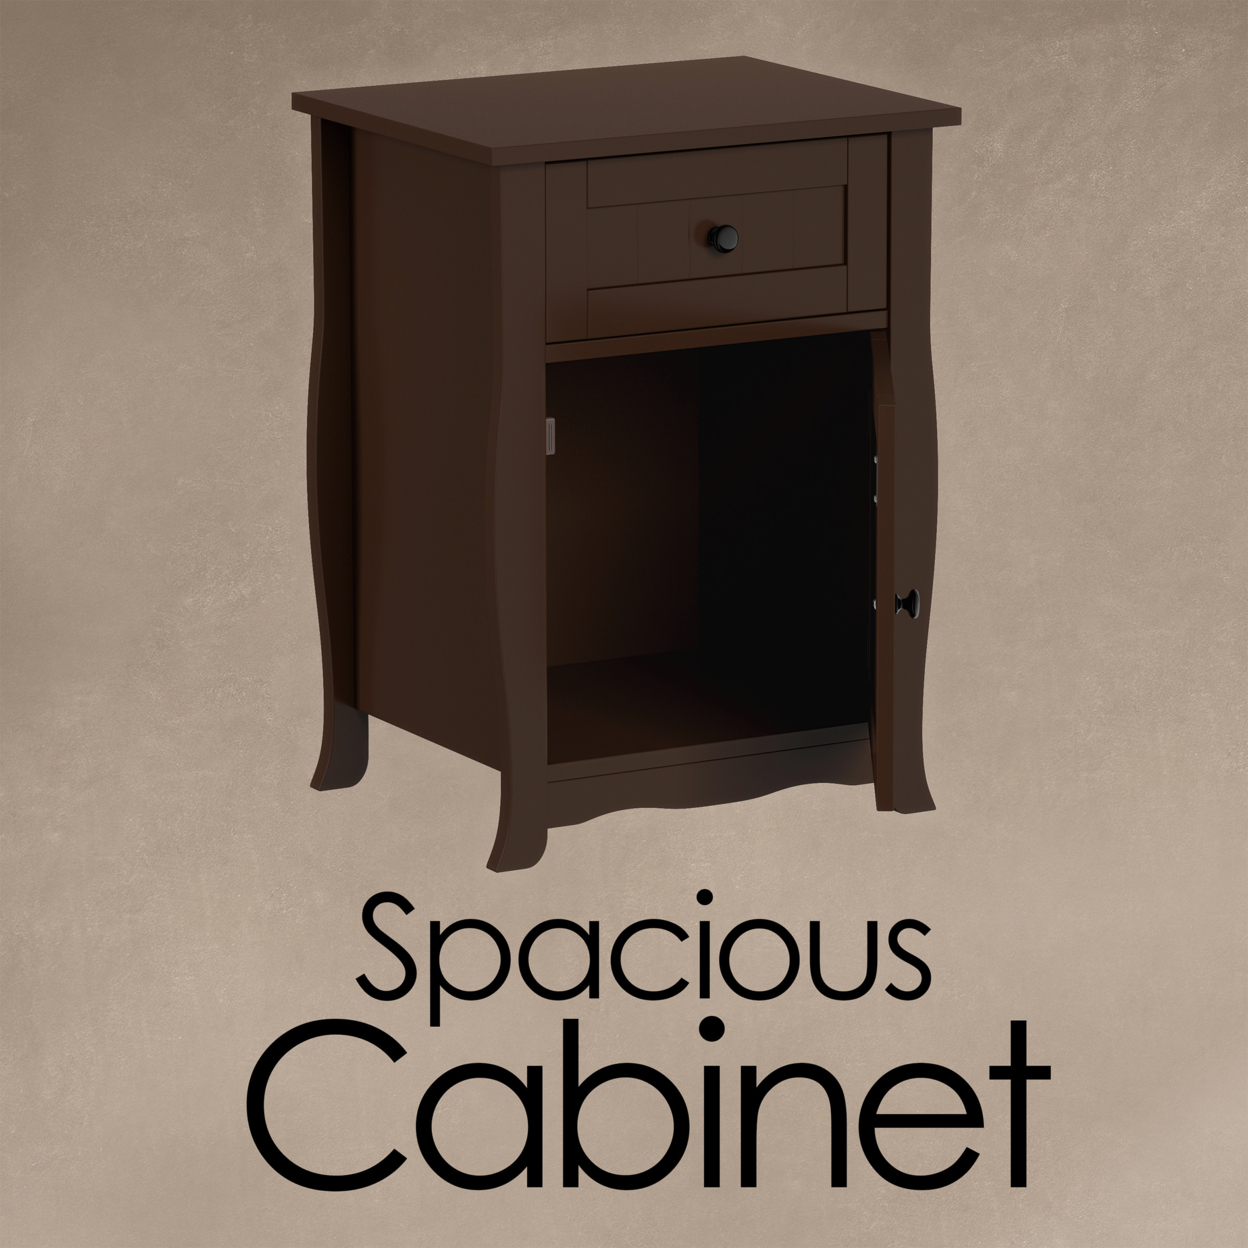 Accent Table- Storage Drawer & Cabinet- Sofa End Table In Dark Brown- Traditional Style Wooden Nightstand